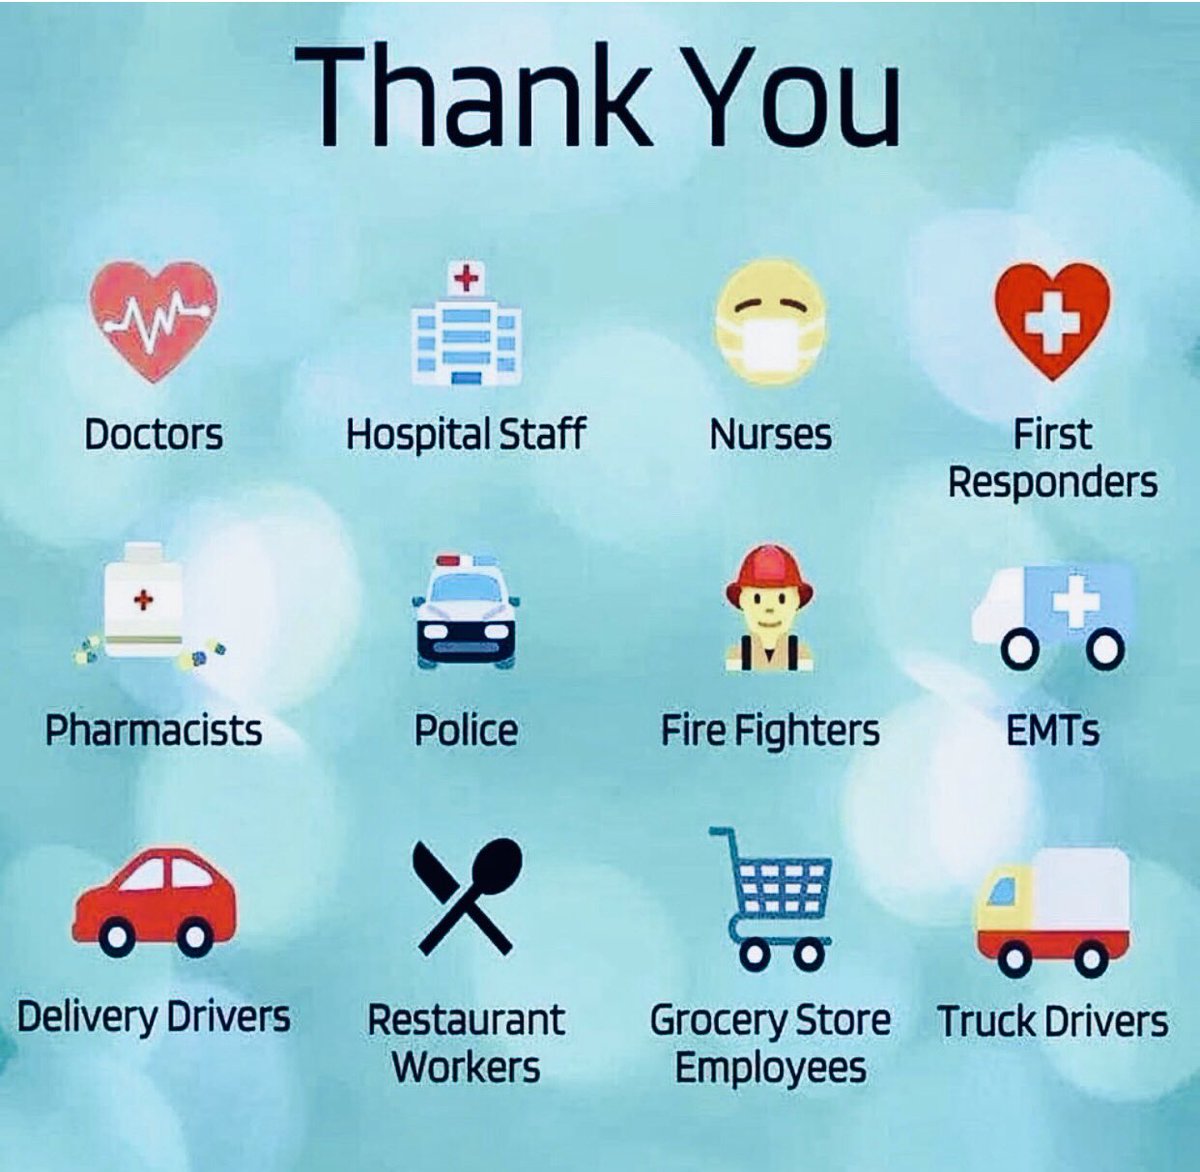 #MondayMood ~ thankful❤️  #thankyou #grateful #doctors #hospitalstaff #nurses #firstresponders #pharmacists #police #firefighters #emts #deliverydrivers #restaurantworkers #grocerystoreemployees #truckdrivers